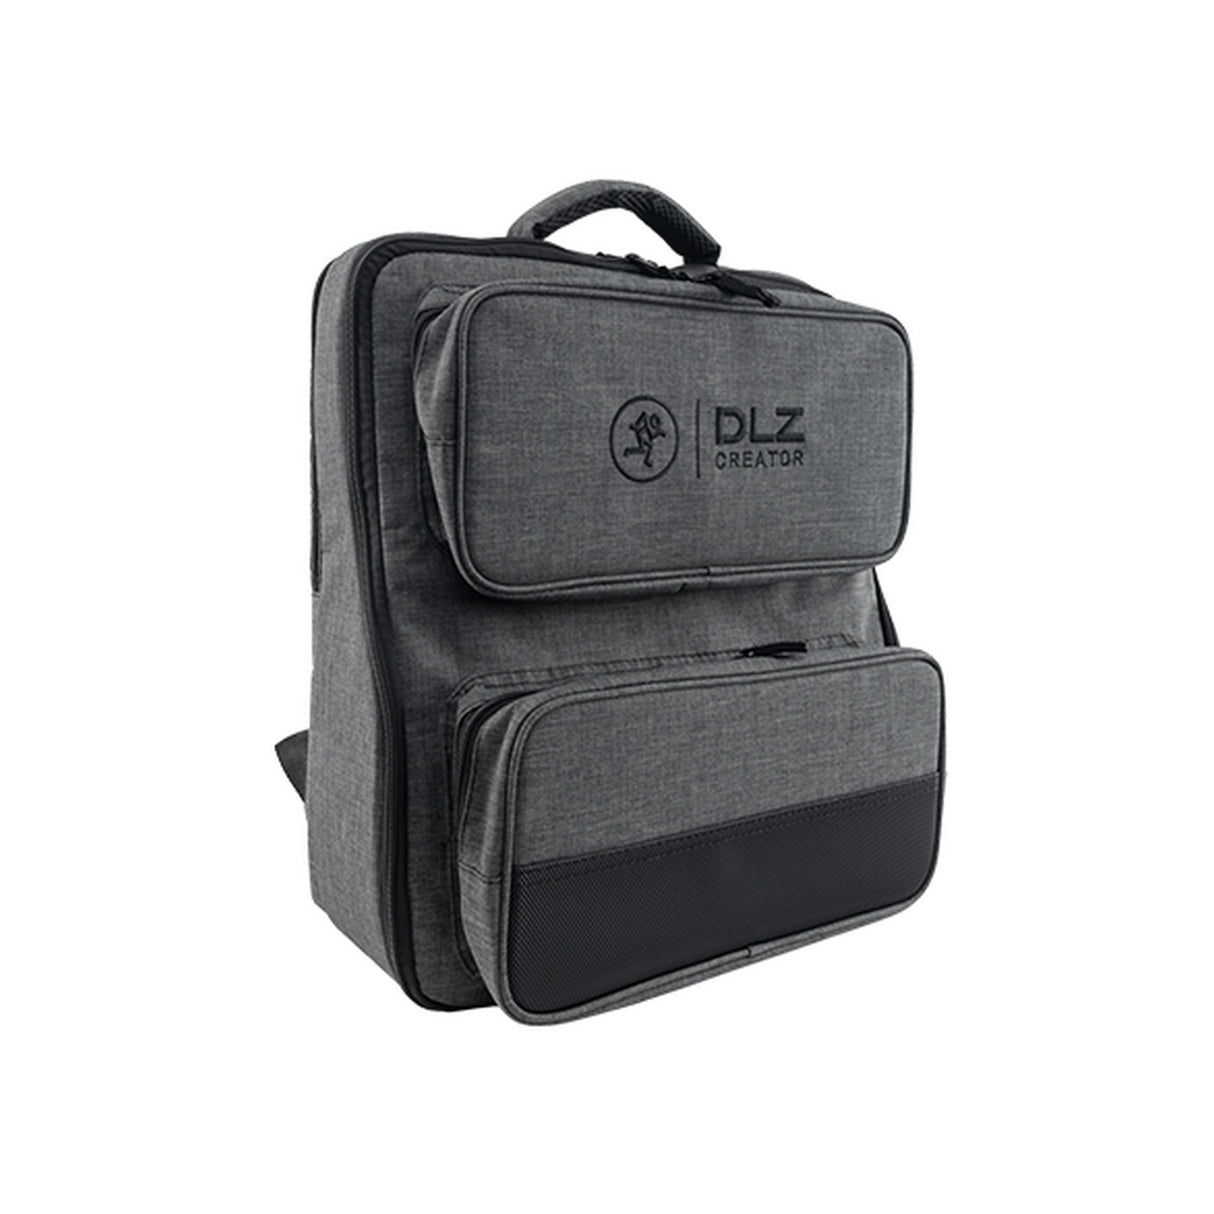 Mackie Backpack for DLZ Creator Mixer and Accessories